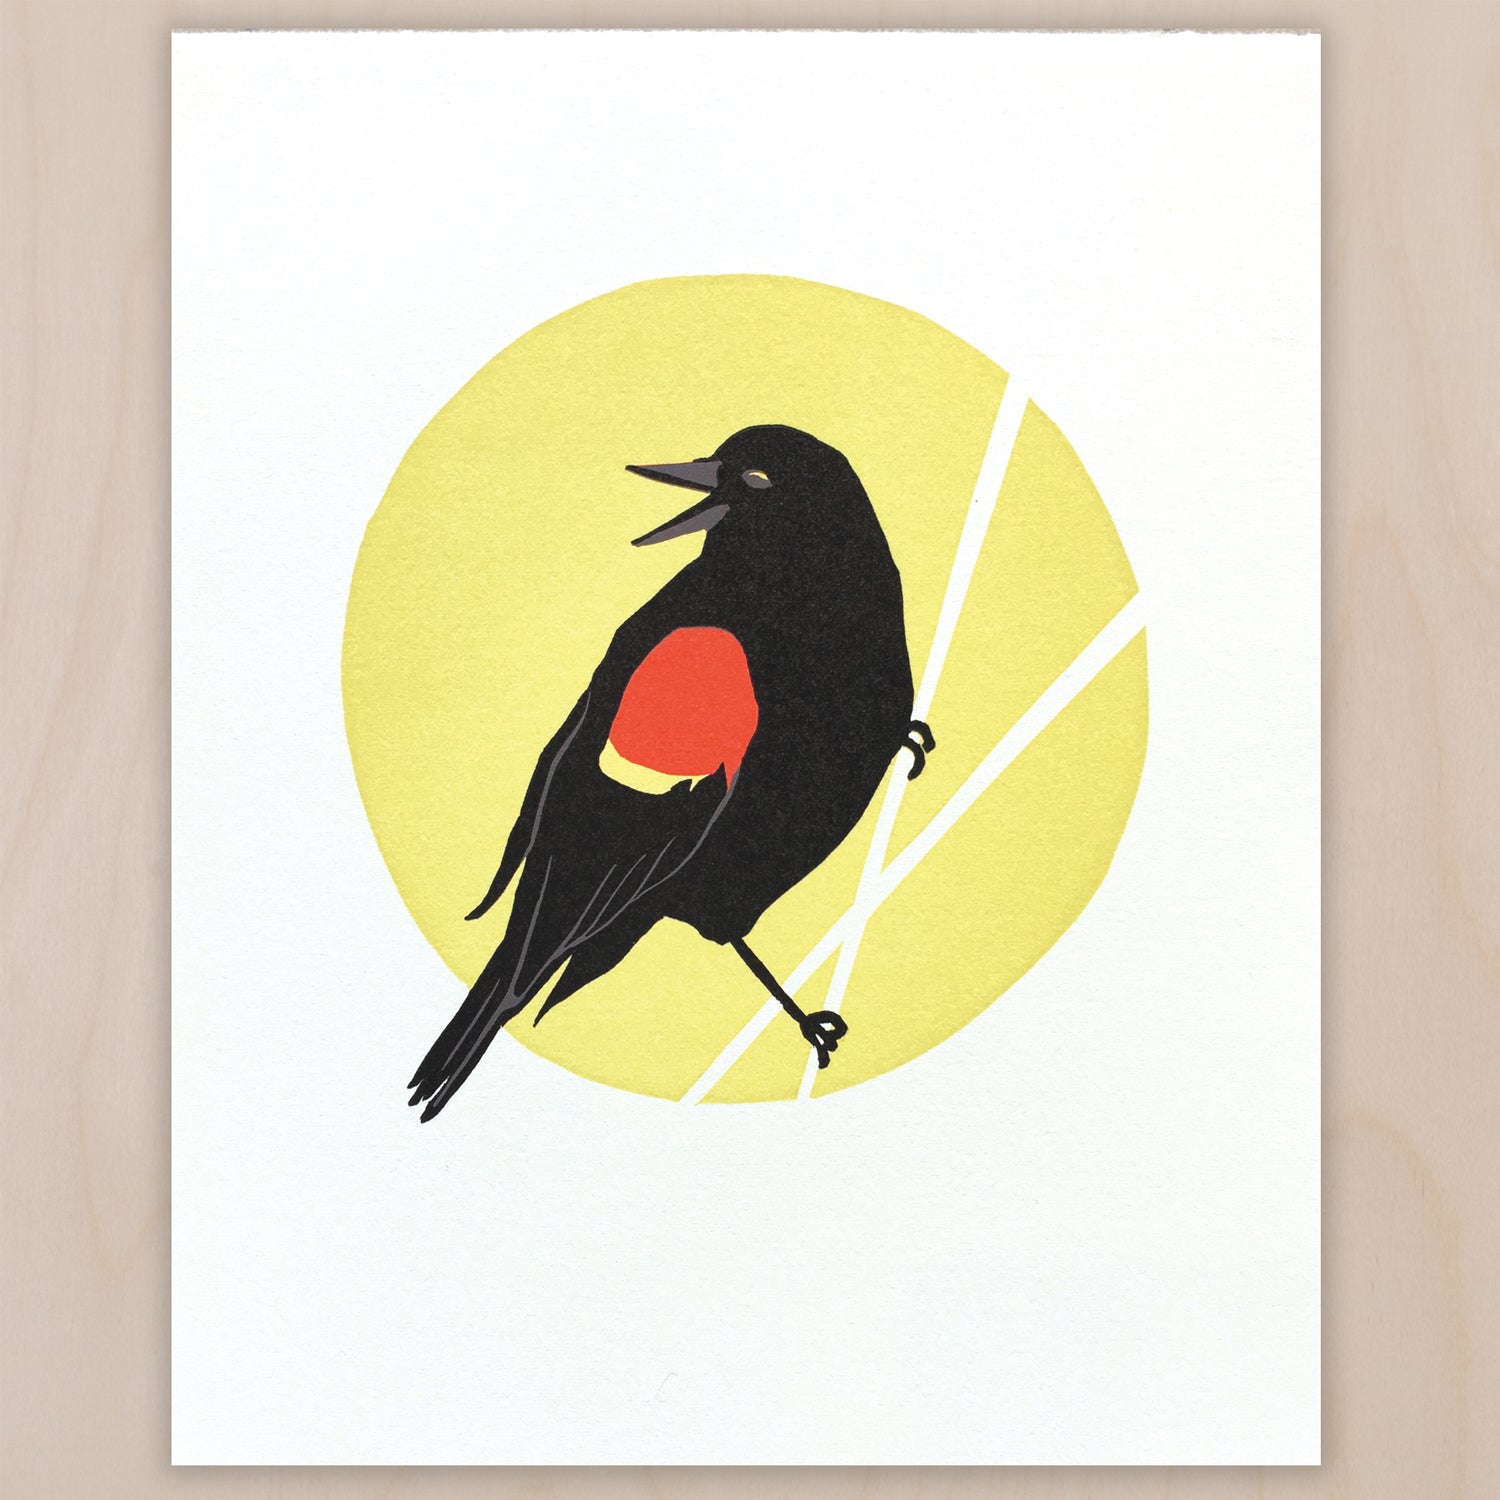 Linoleum block print on white paper showing a side-view of a Red-winged Blackbird, with it's head turned to the left and it's beak open. It is on a yellow circle that has white diagonal lines through it that look like reeds. It is holding onto one of these lines with its feet.